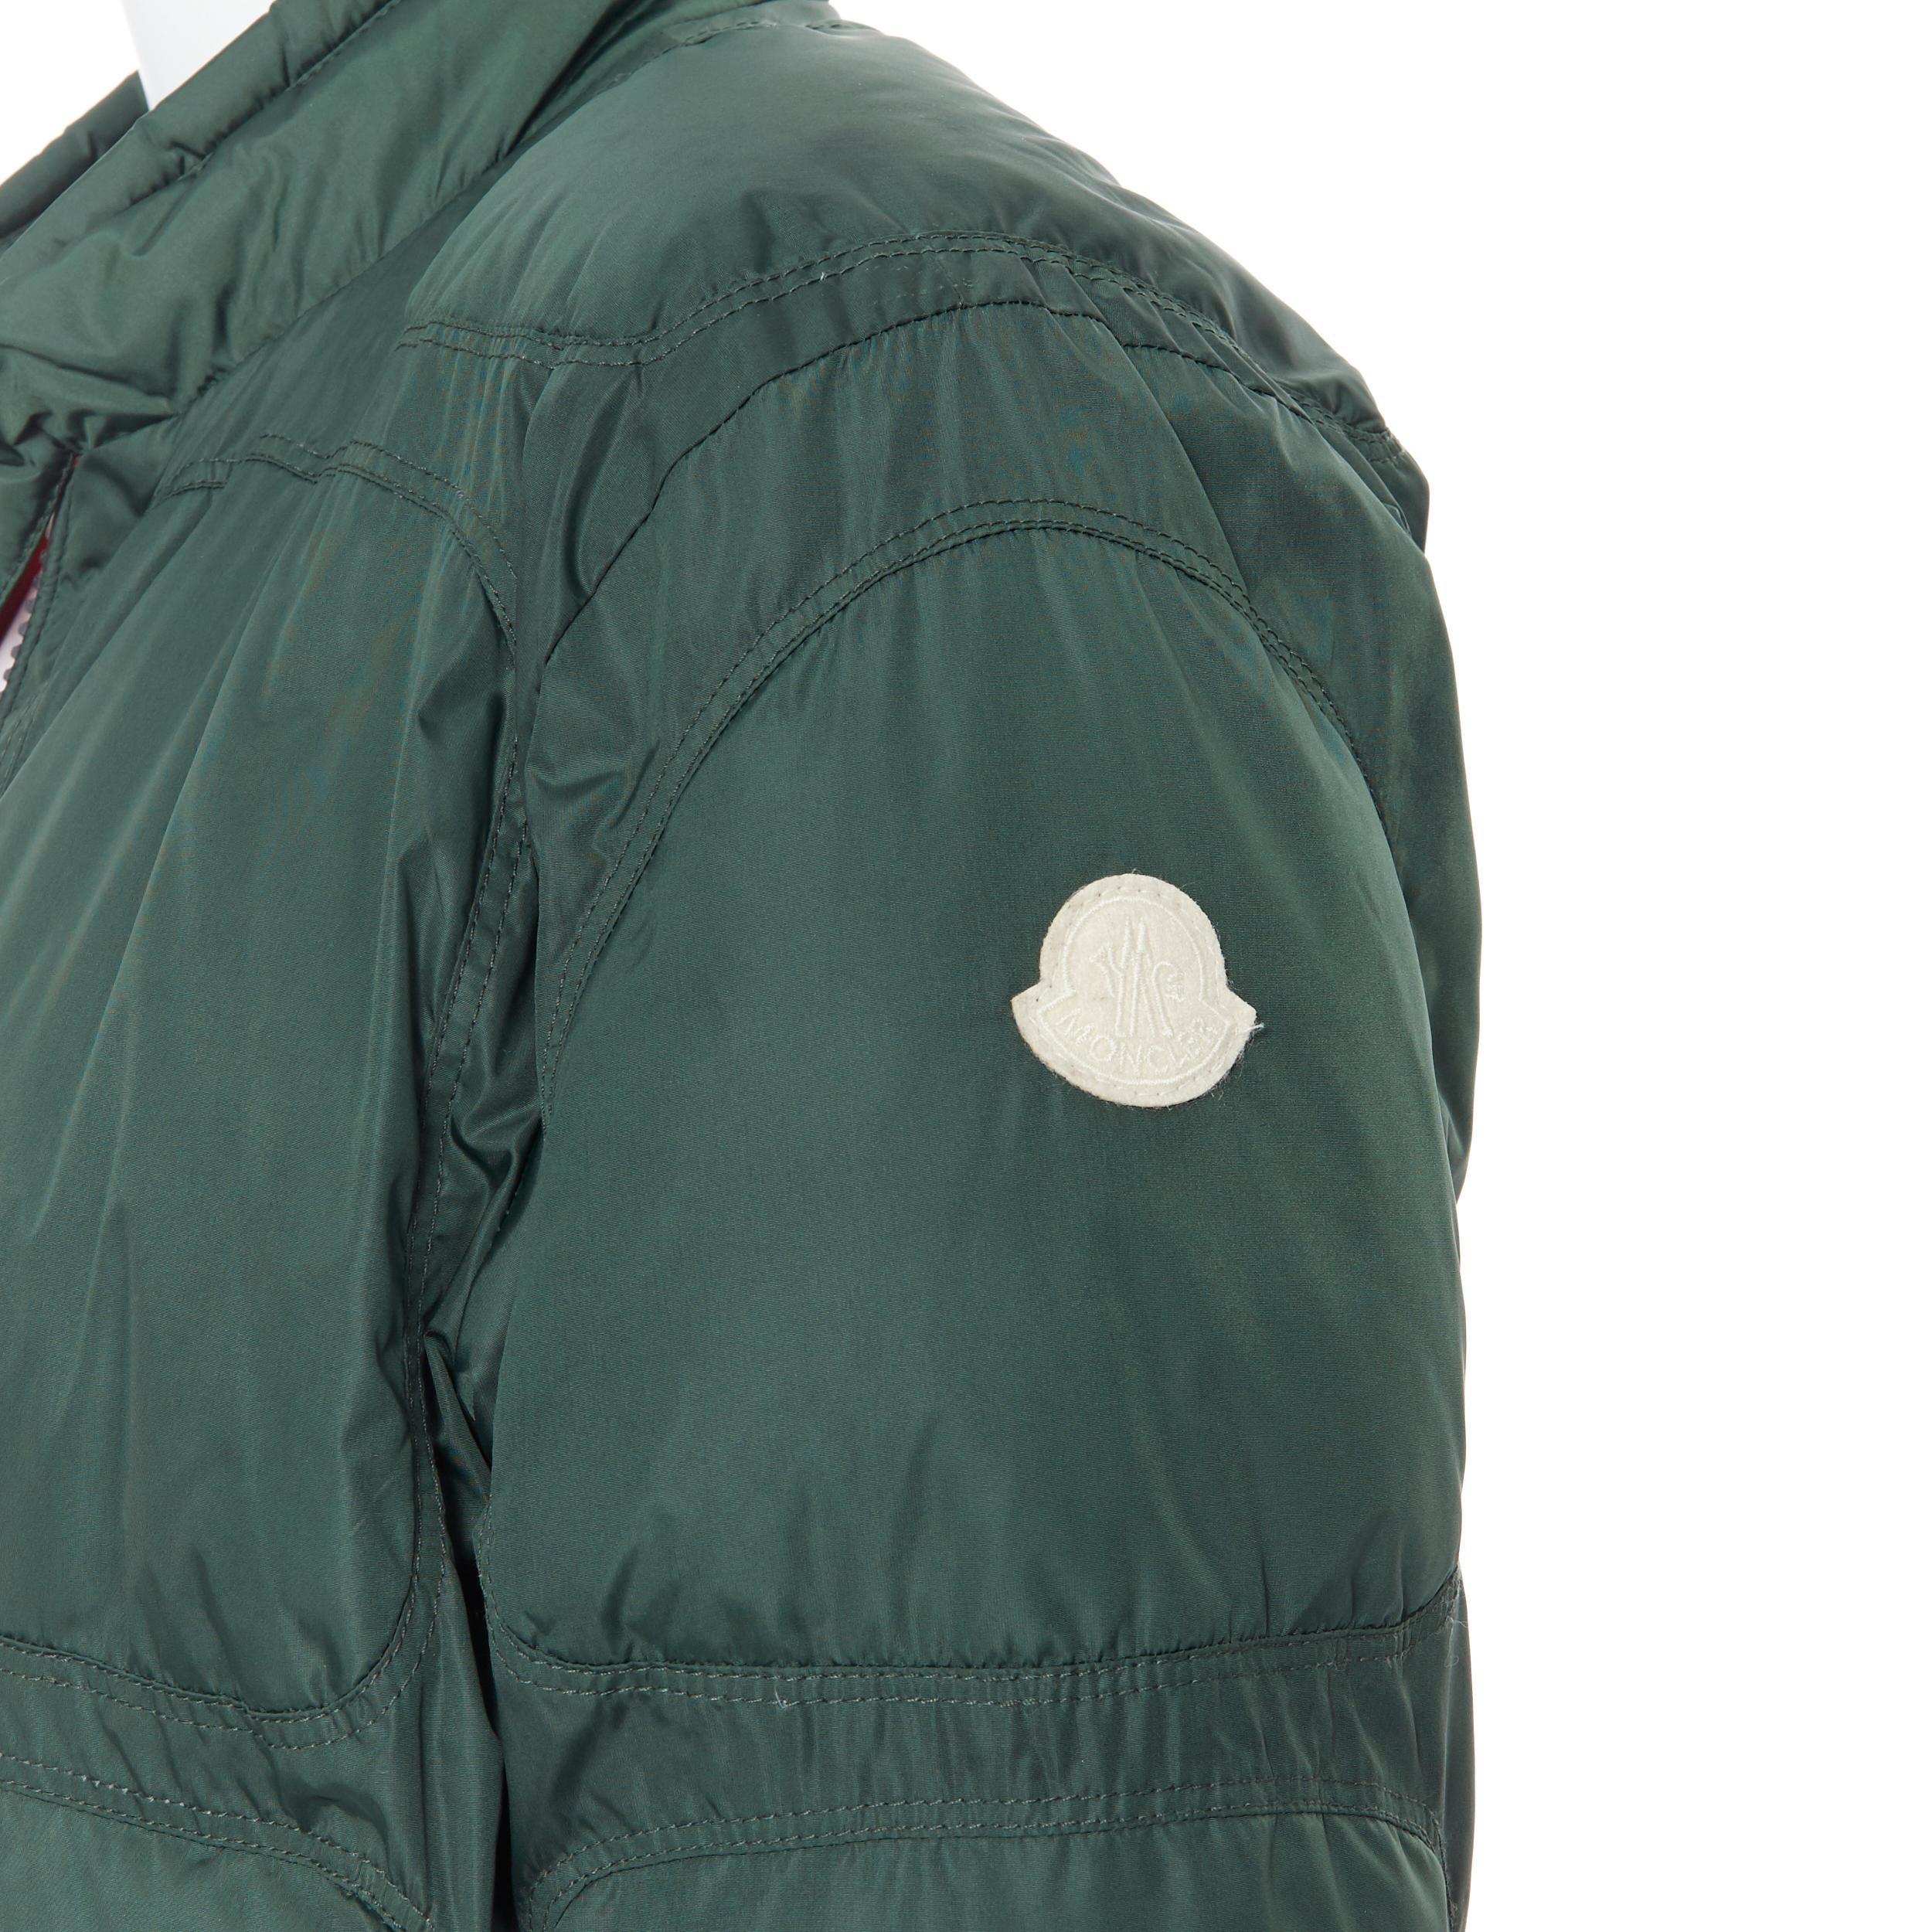 MONCLER Cheriton Giubbotto green down feather padded puffer winter jacket US3 L
Brand: Moncler
Model Name / Style: Padded jacket
Material: Nylon, down
Color: Green
Pattern: Solid
Closure: Zip
Extra Detail: Down padded. Contrast red lining. Long